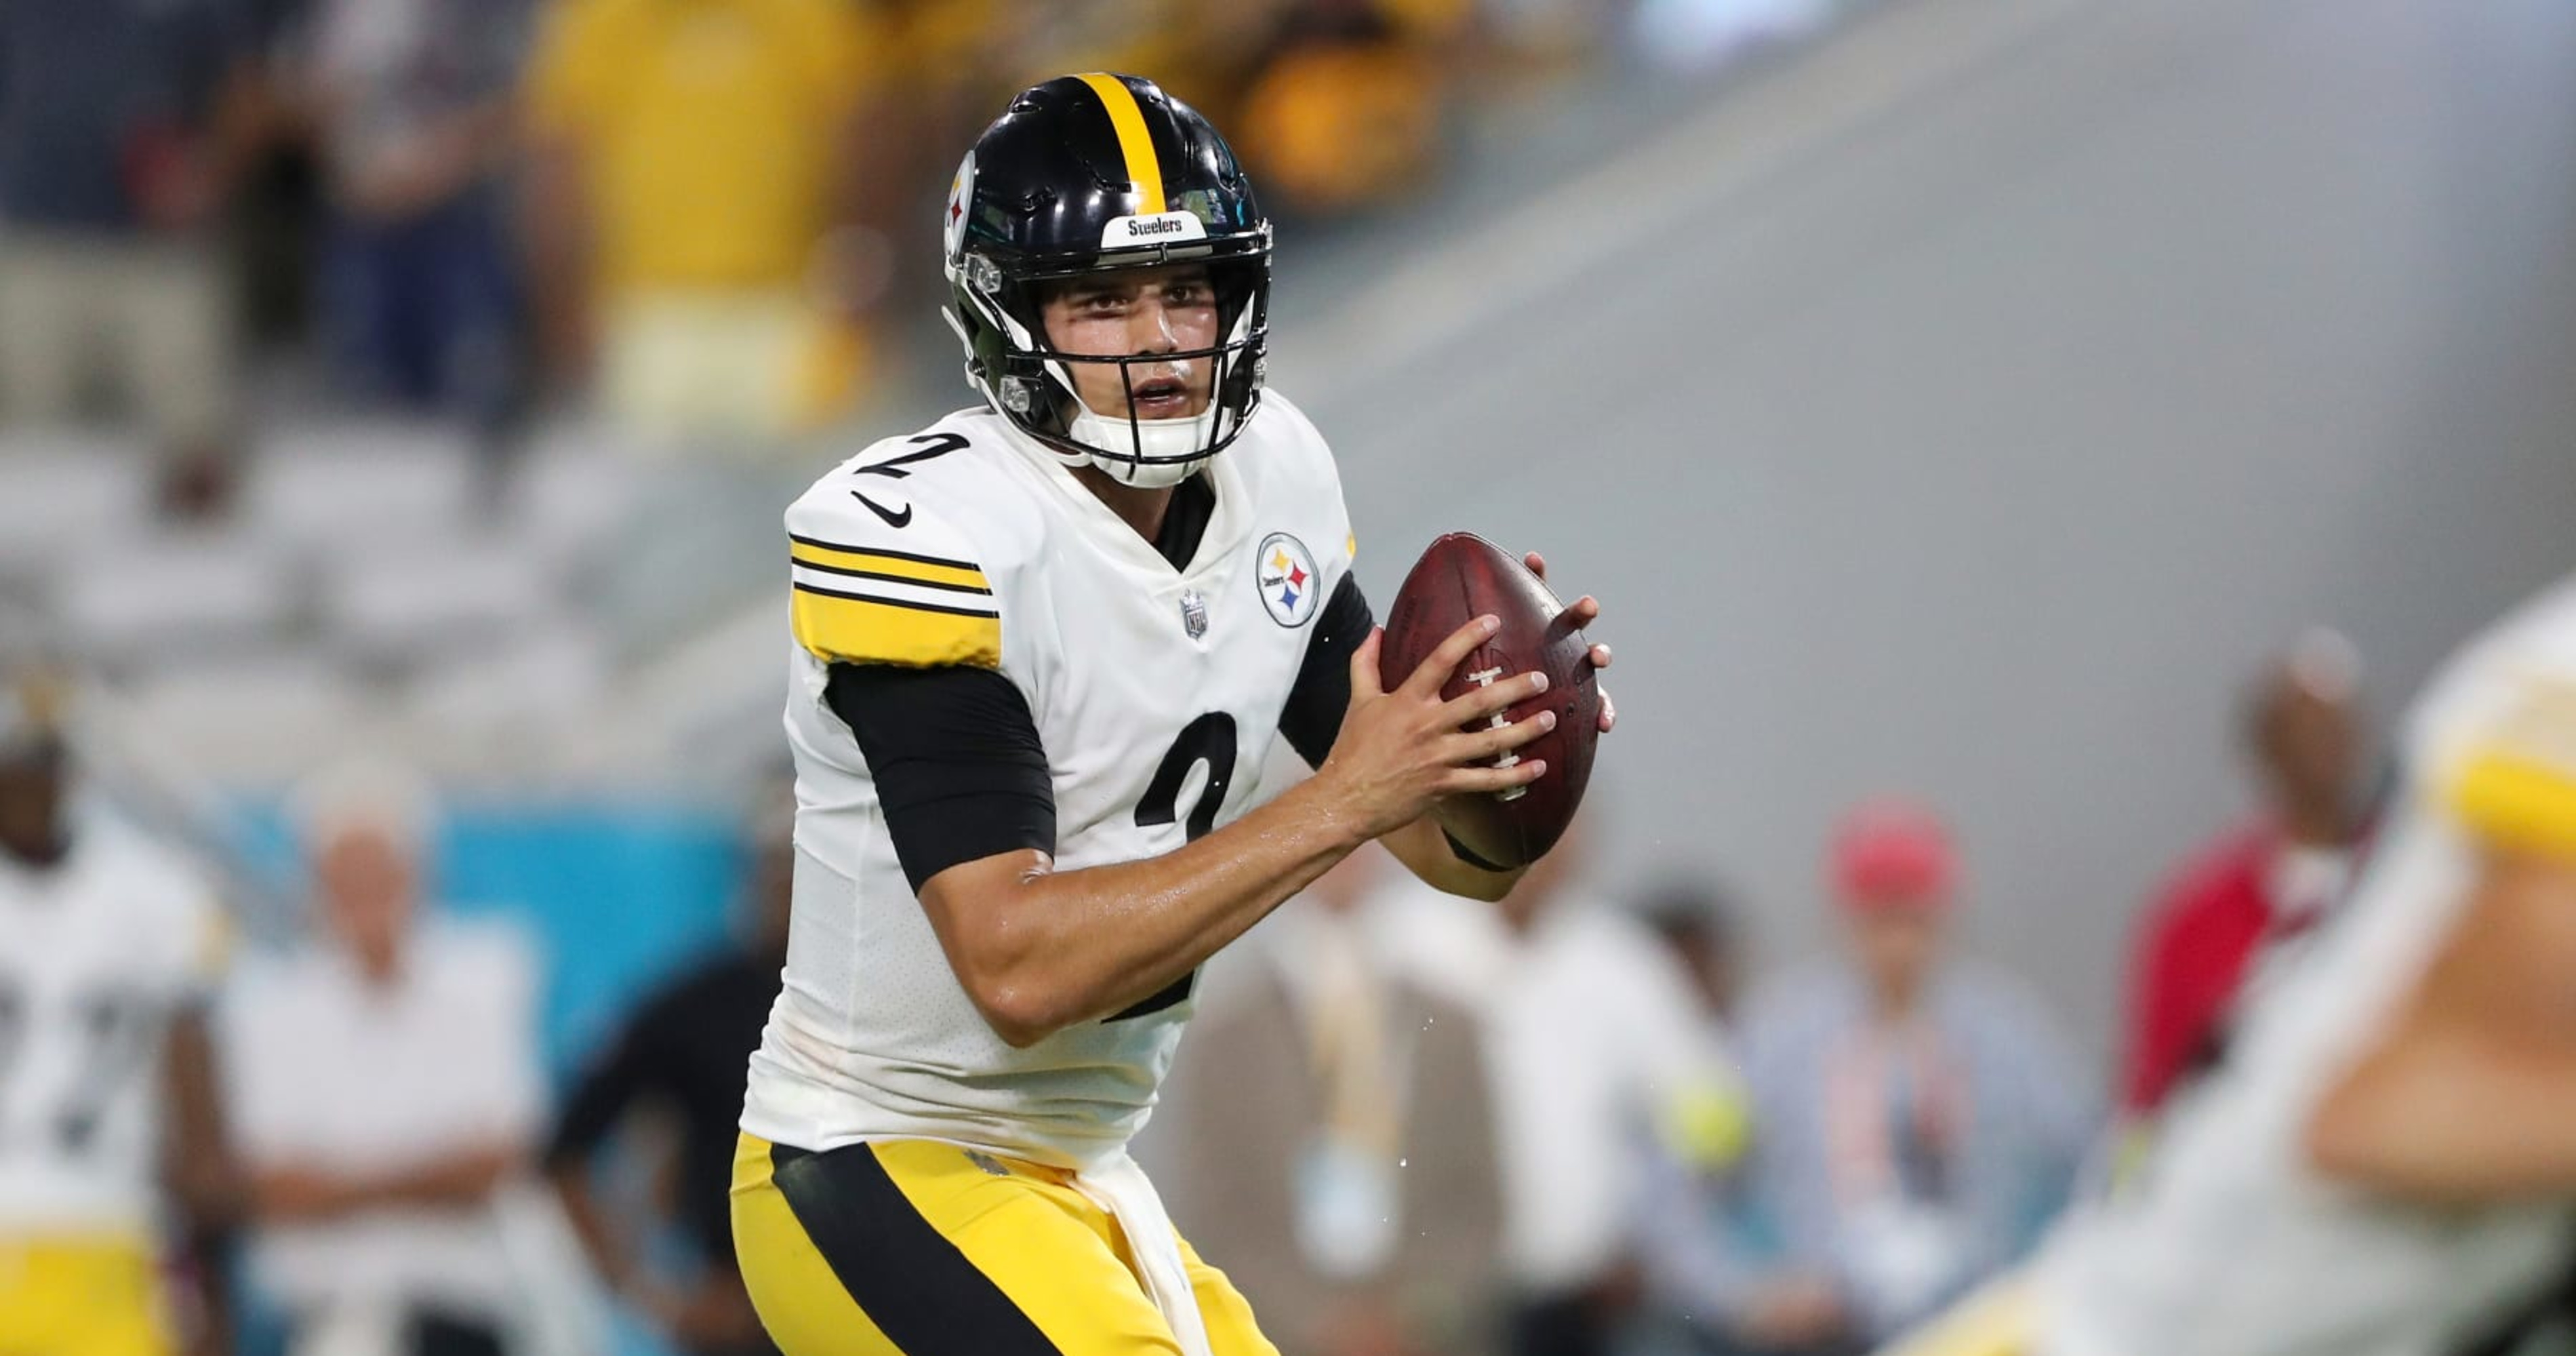 Steelers Rumors: Mason Rudolph Has Drawn Trade Interest Ahead of Week 1, News, Scores, Highlights, Stats, and Rumors